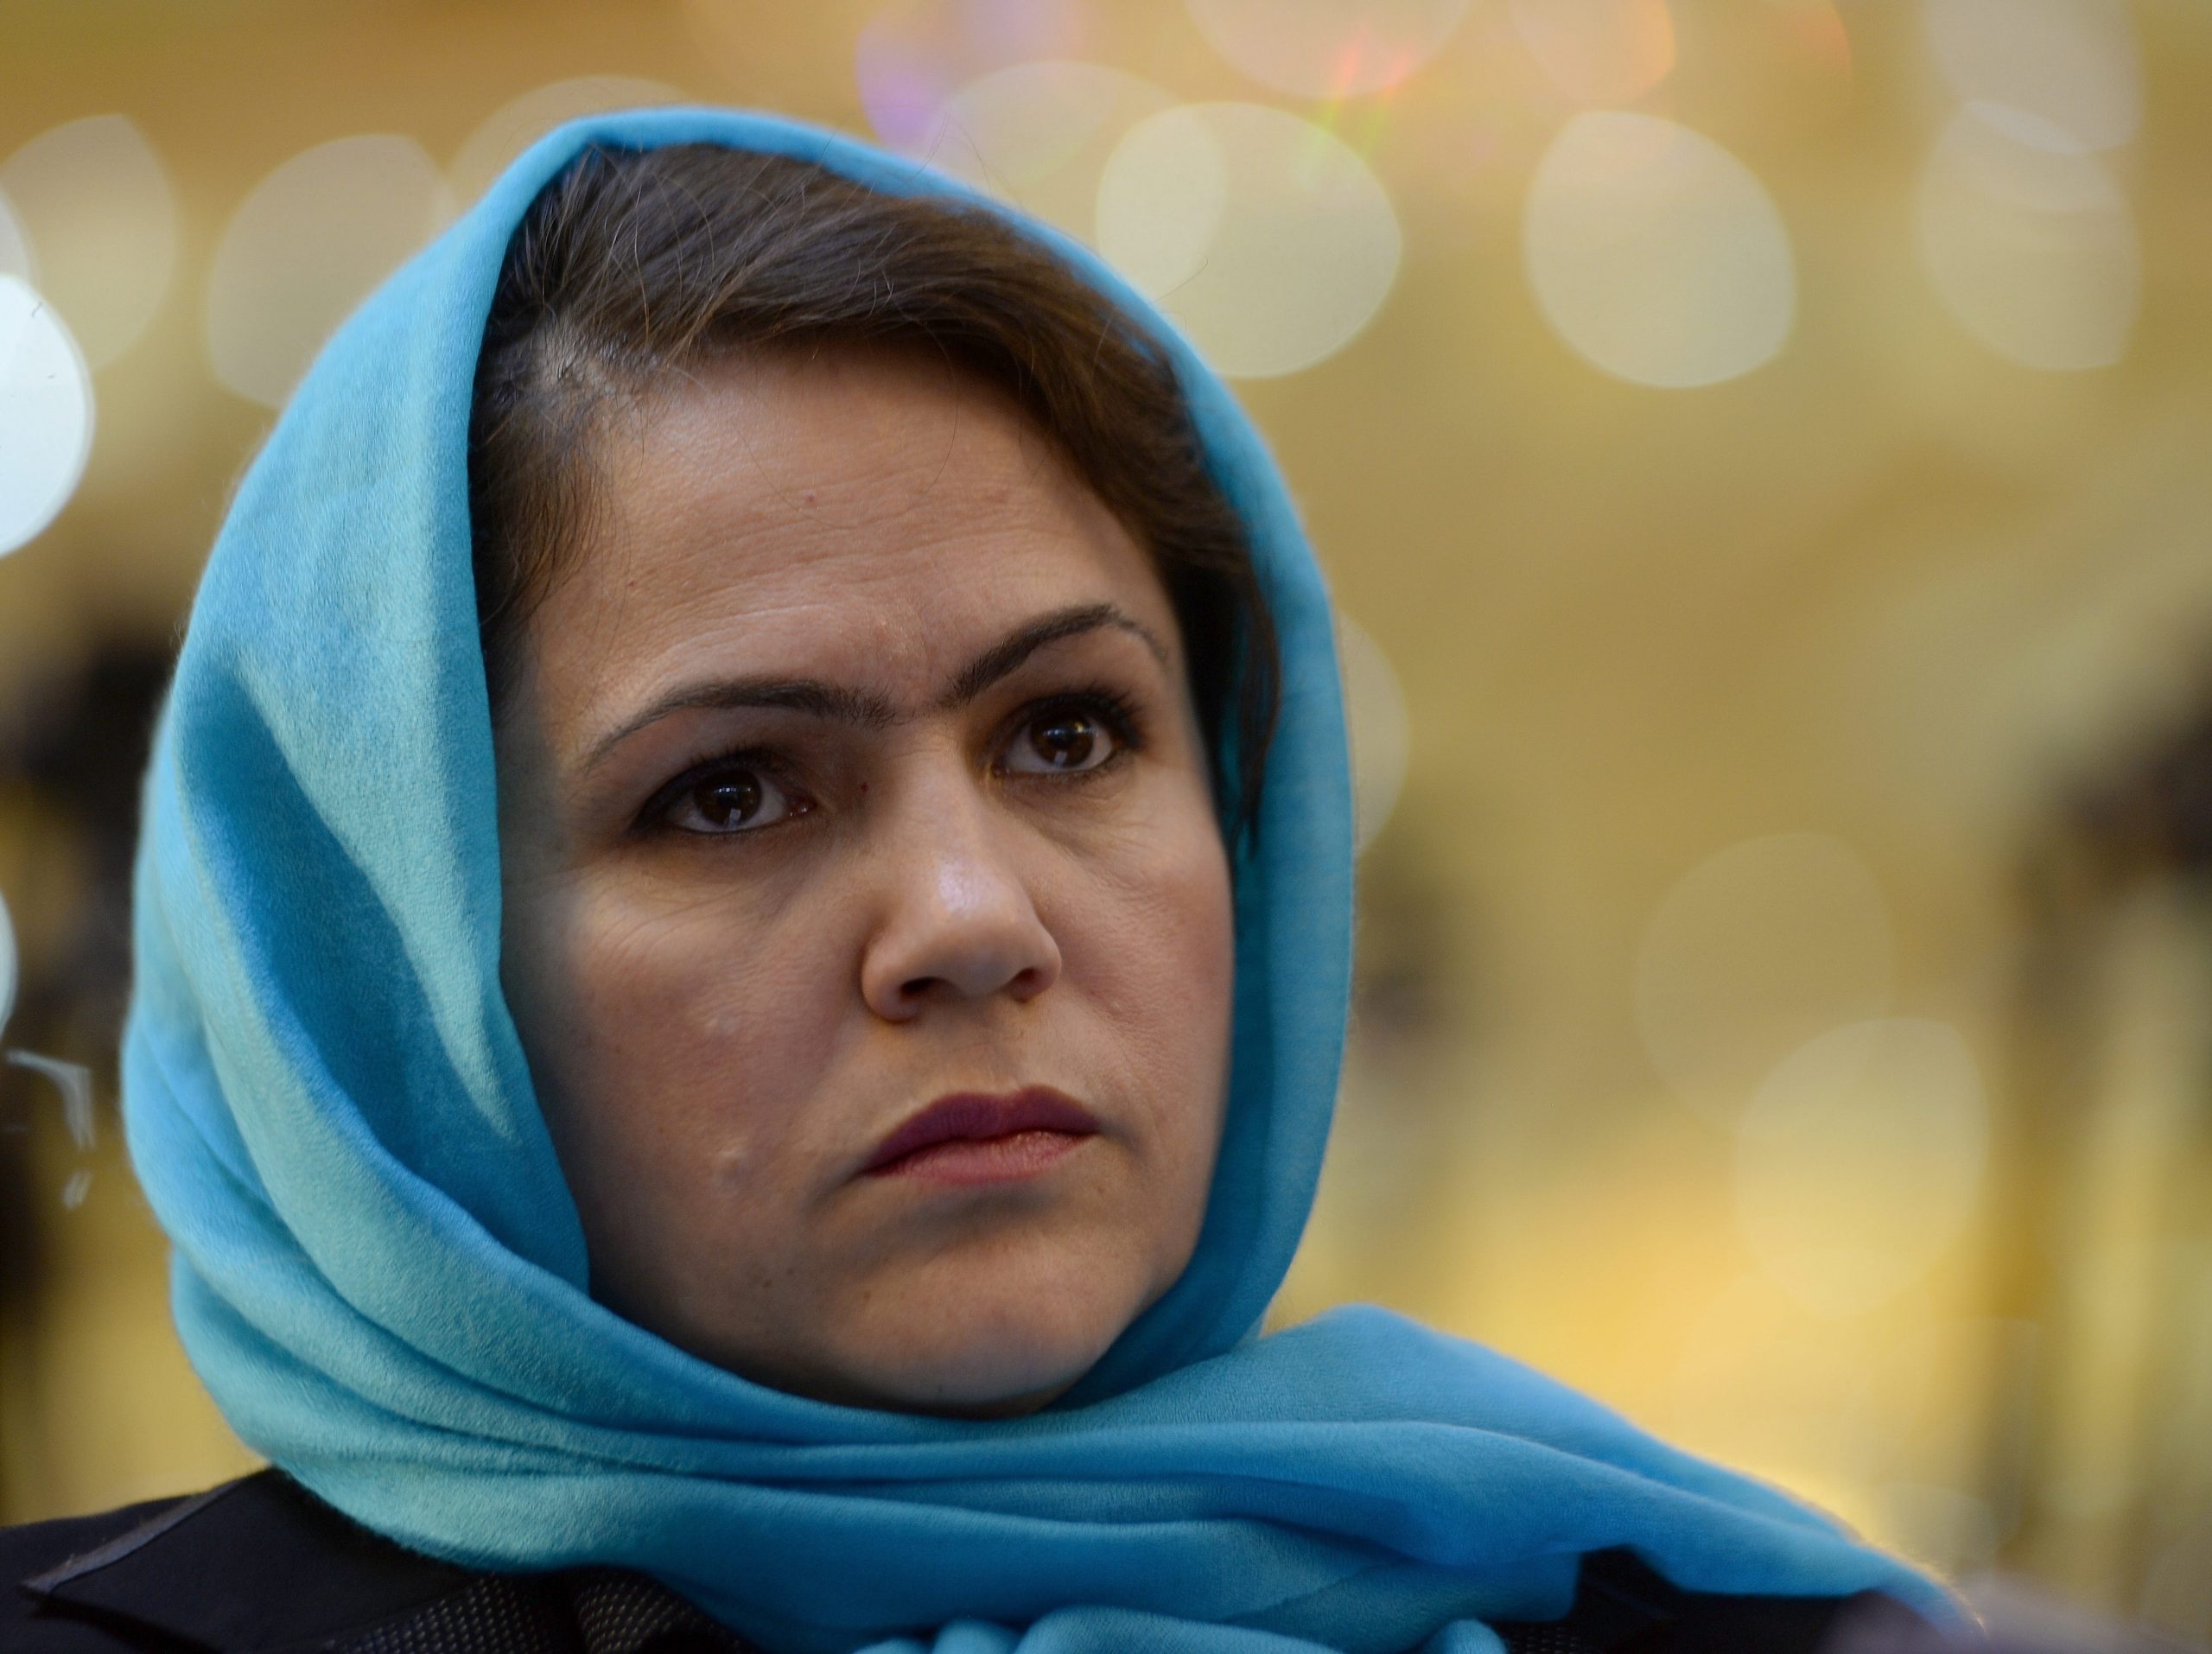 Afghan member of parliament Fawzia Kofi looks on as she attends a political gathering at a wedding hall in Kabul on September 26, 2013.